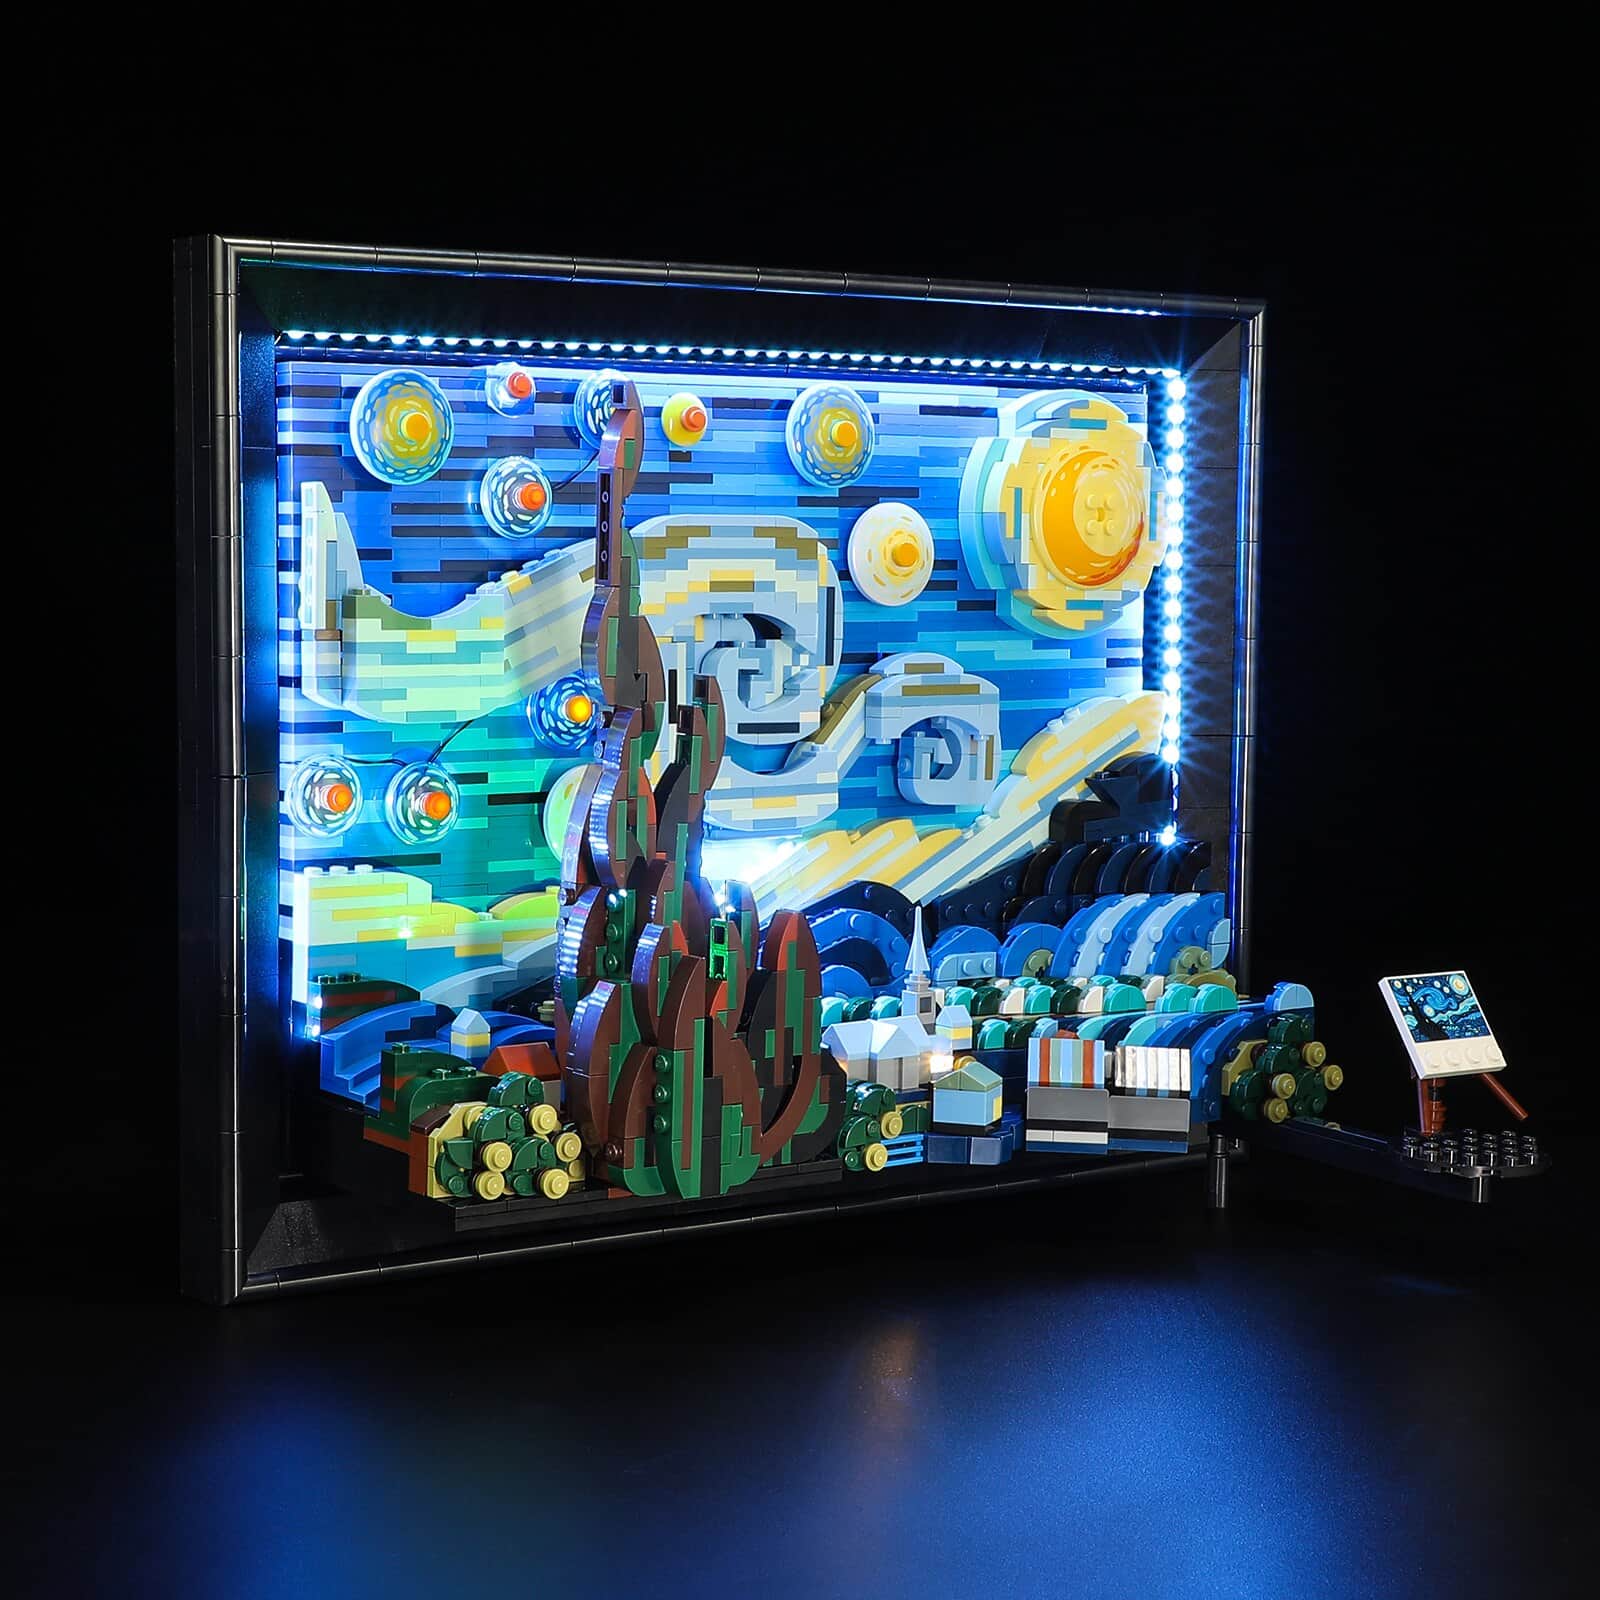 Acrylic Display Case for LEGO Vincent Van Gogh Starry Night